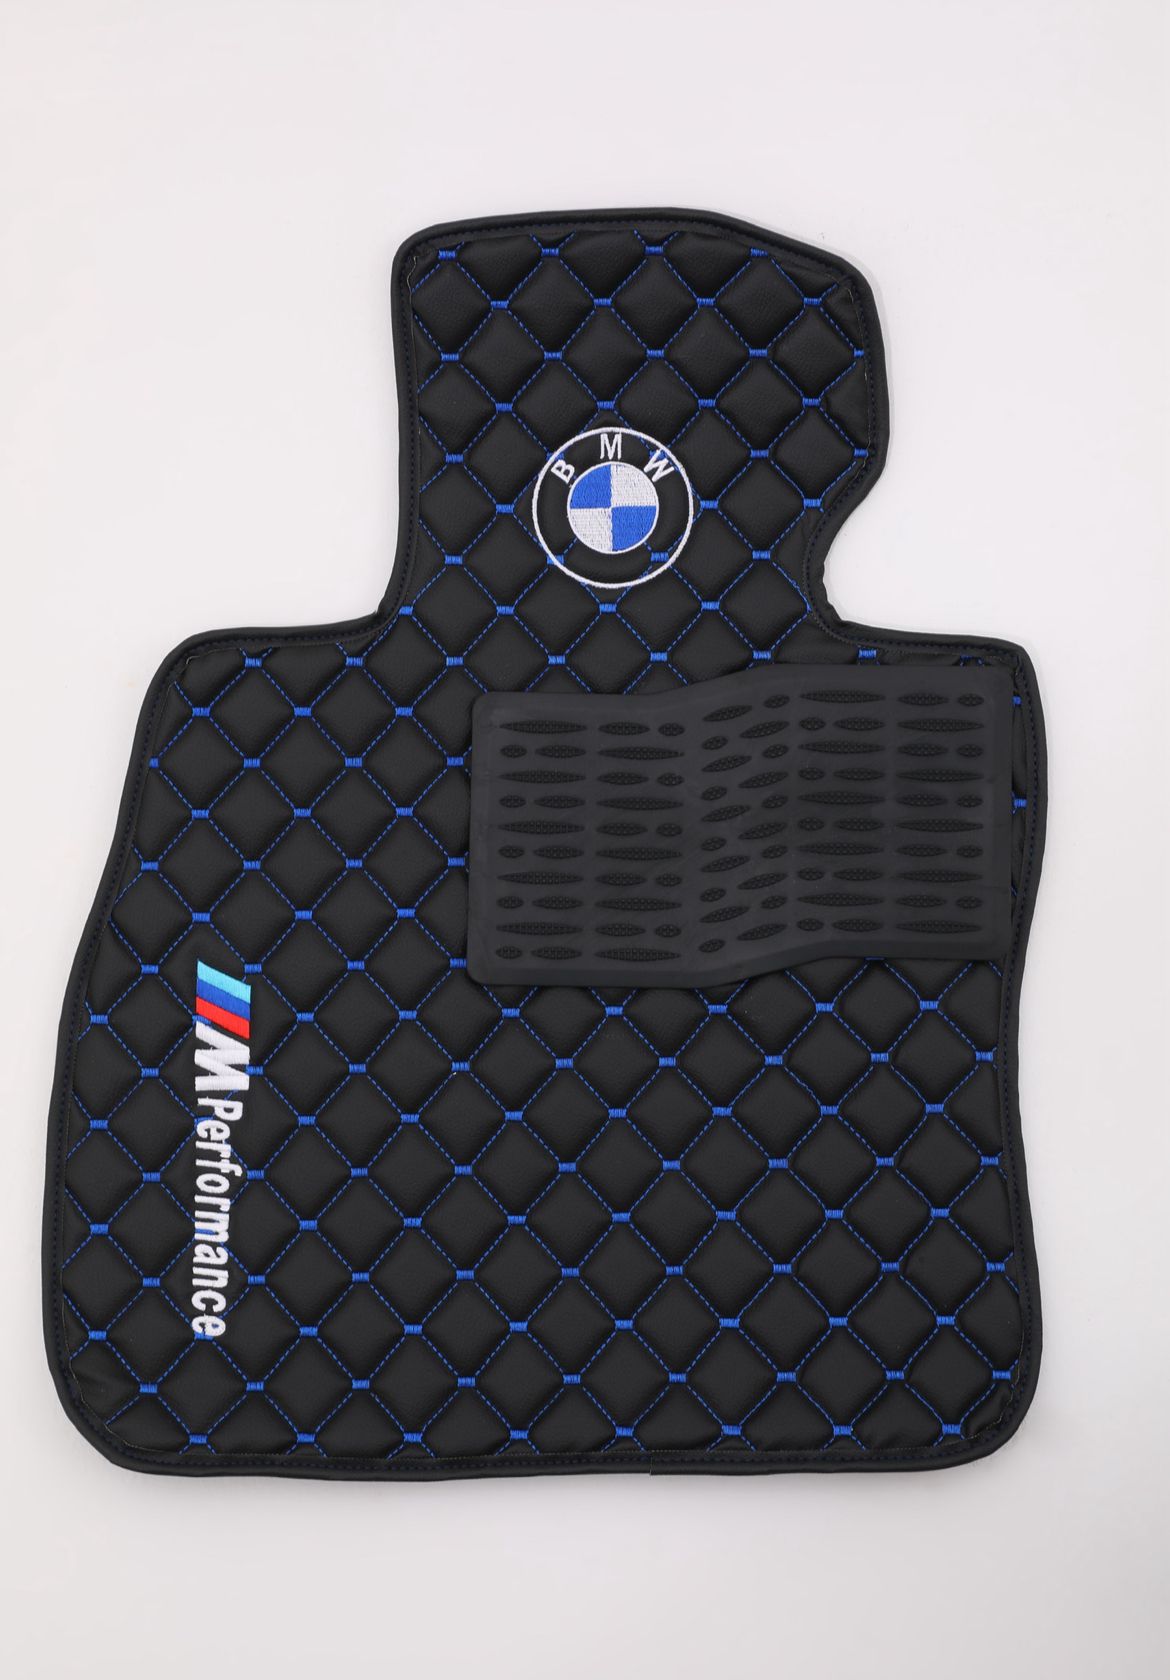 For all BMW E93 M Performance Luxury Leather Custom Car Mat 4x